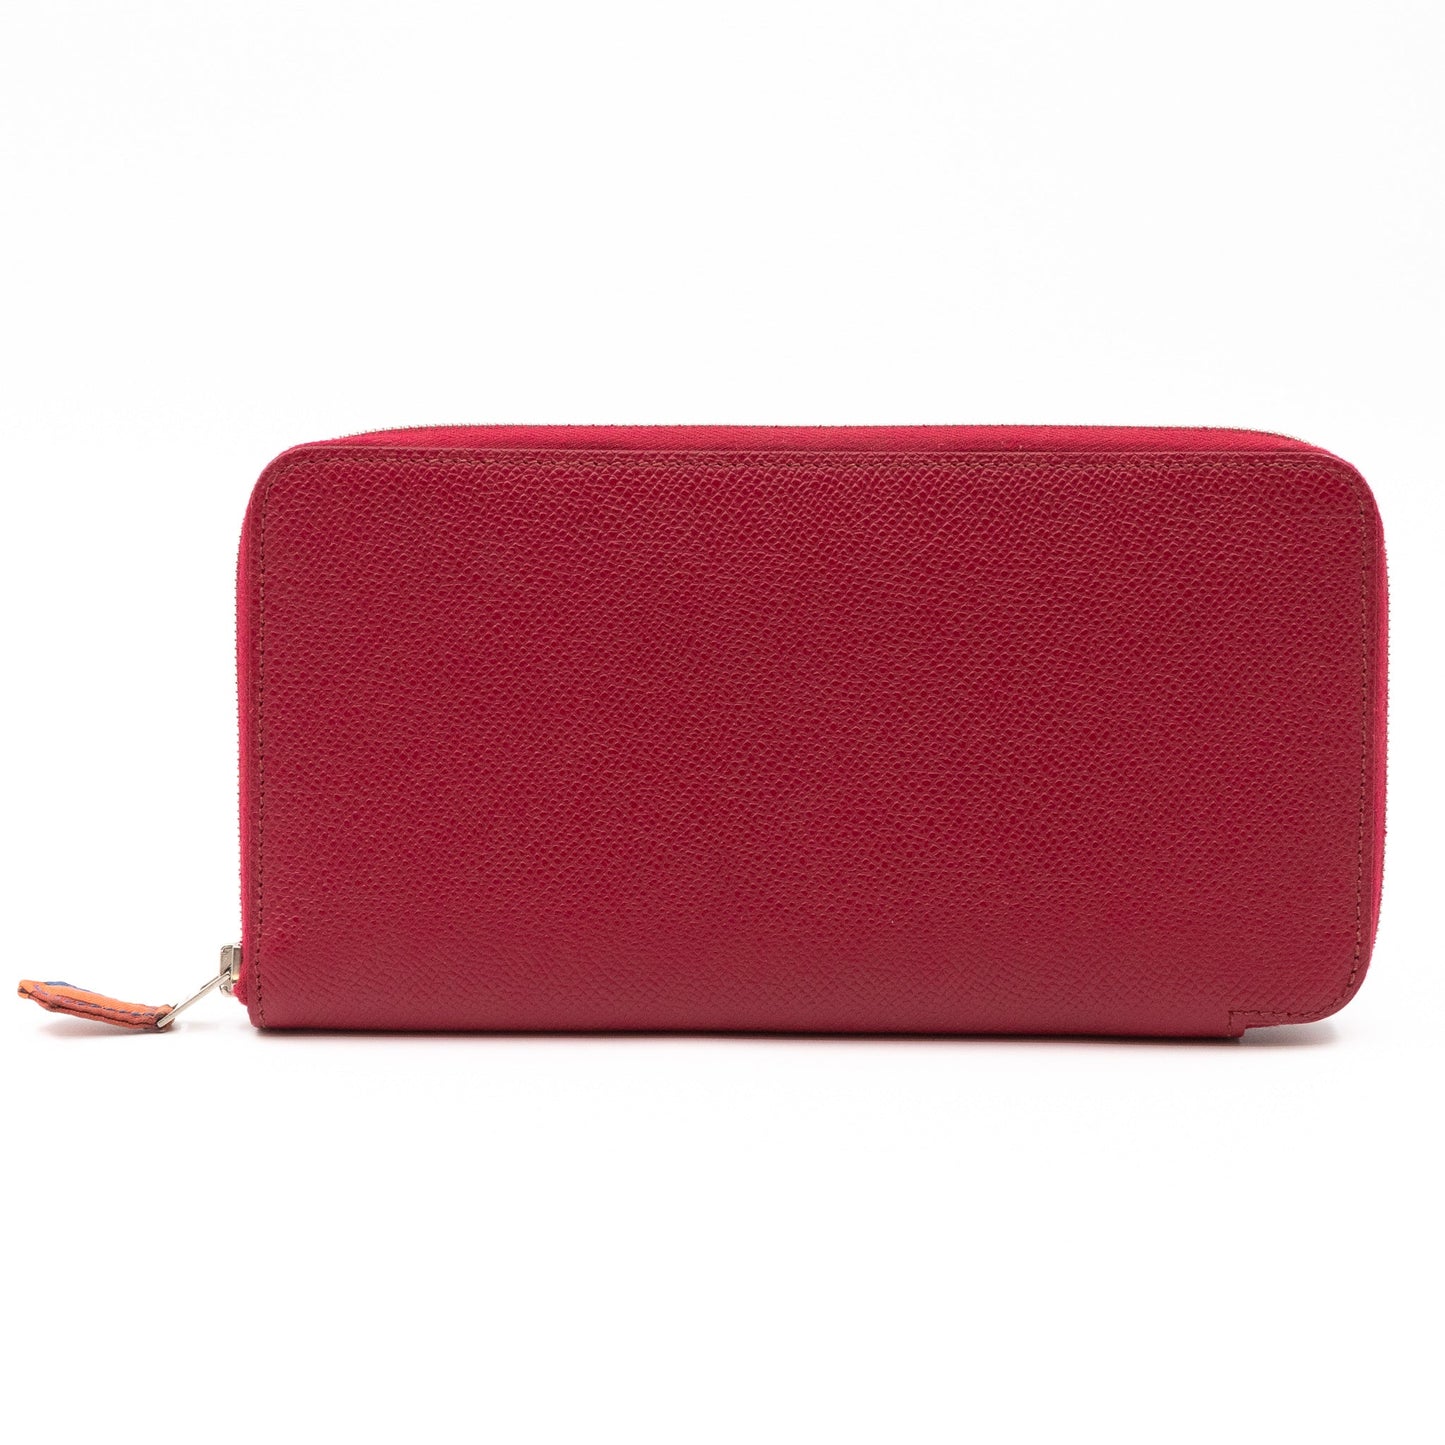 Silk'in Classic Wallet Rubis Leather